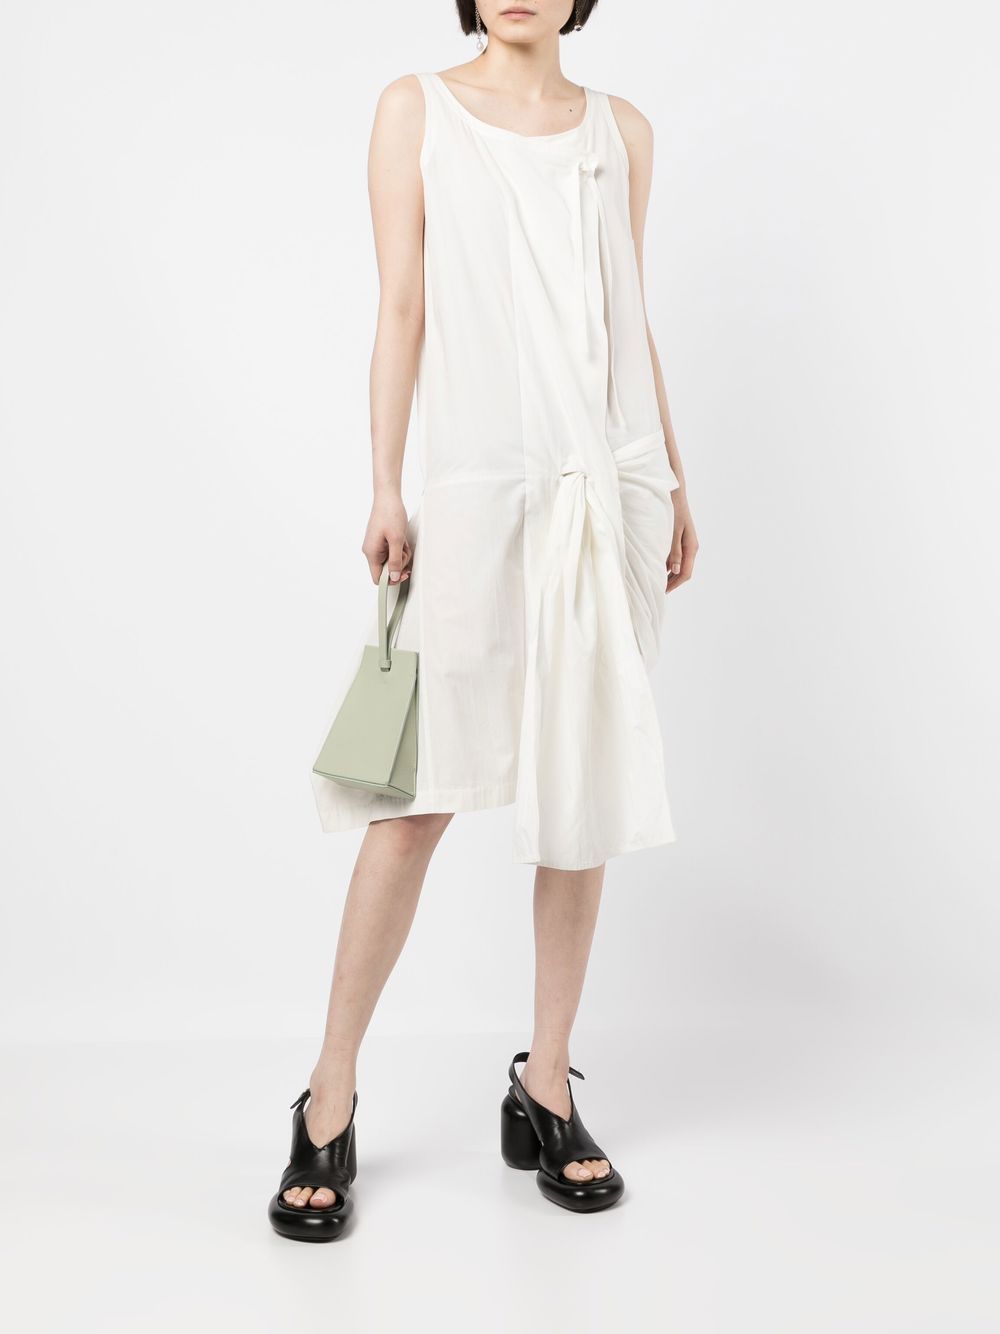 Issey Miyake Pre-Owned 2010s Knot Detail Draped Dress - Farfetch